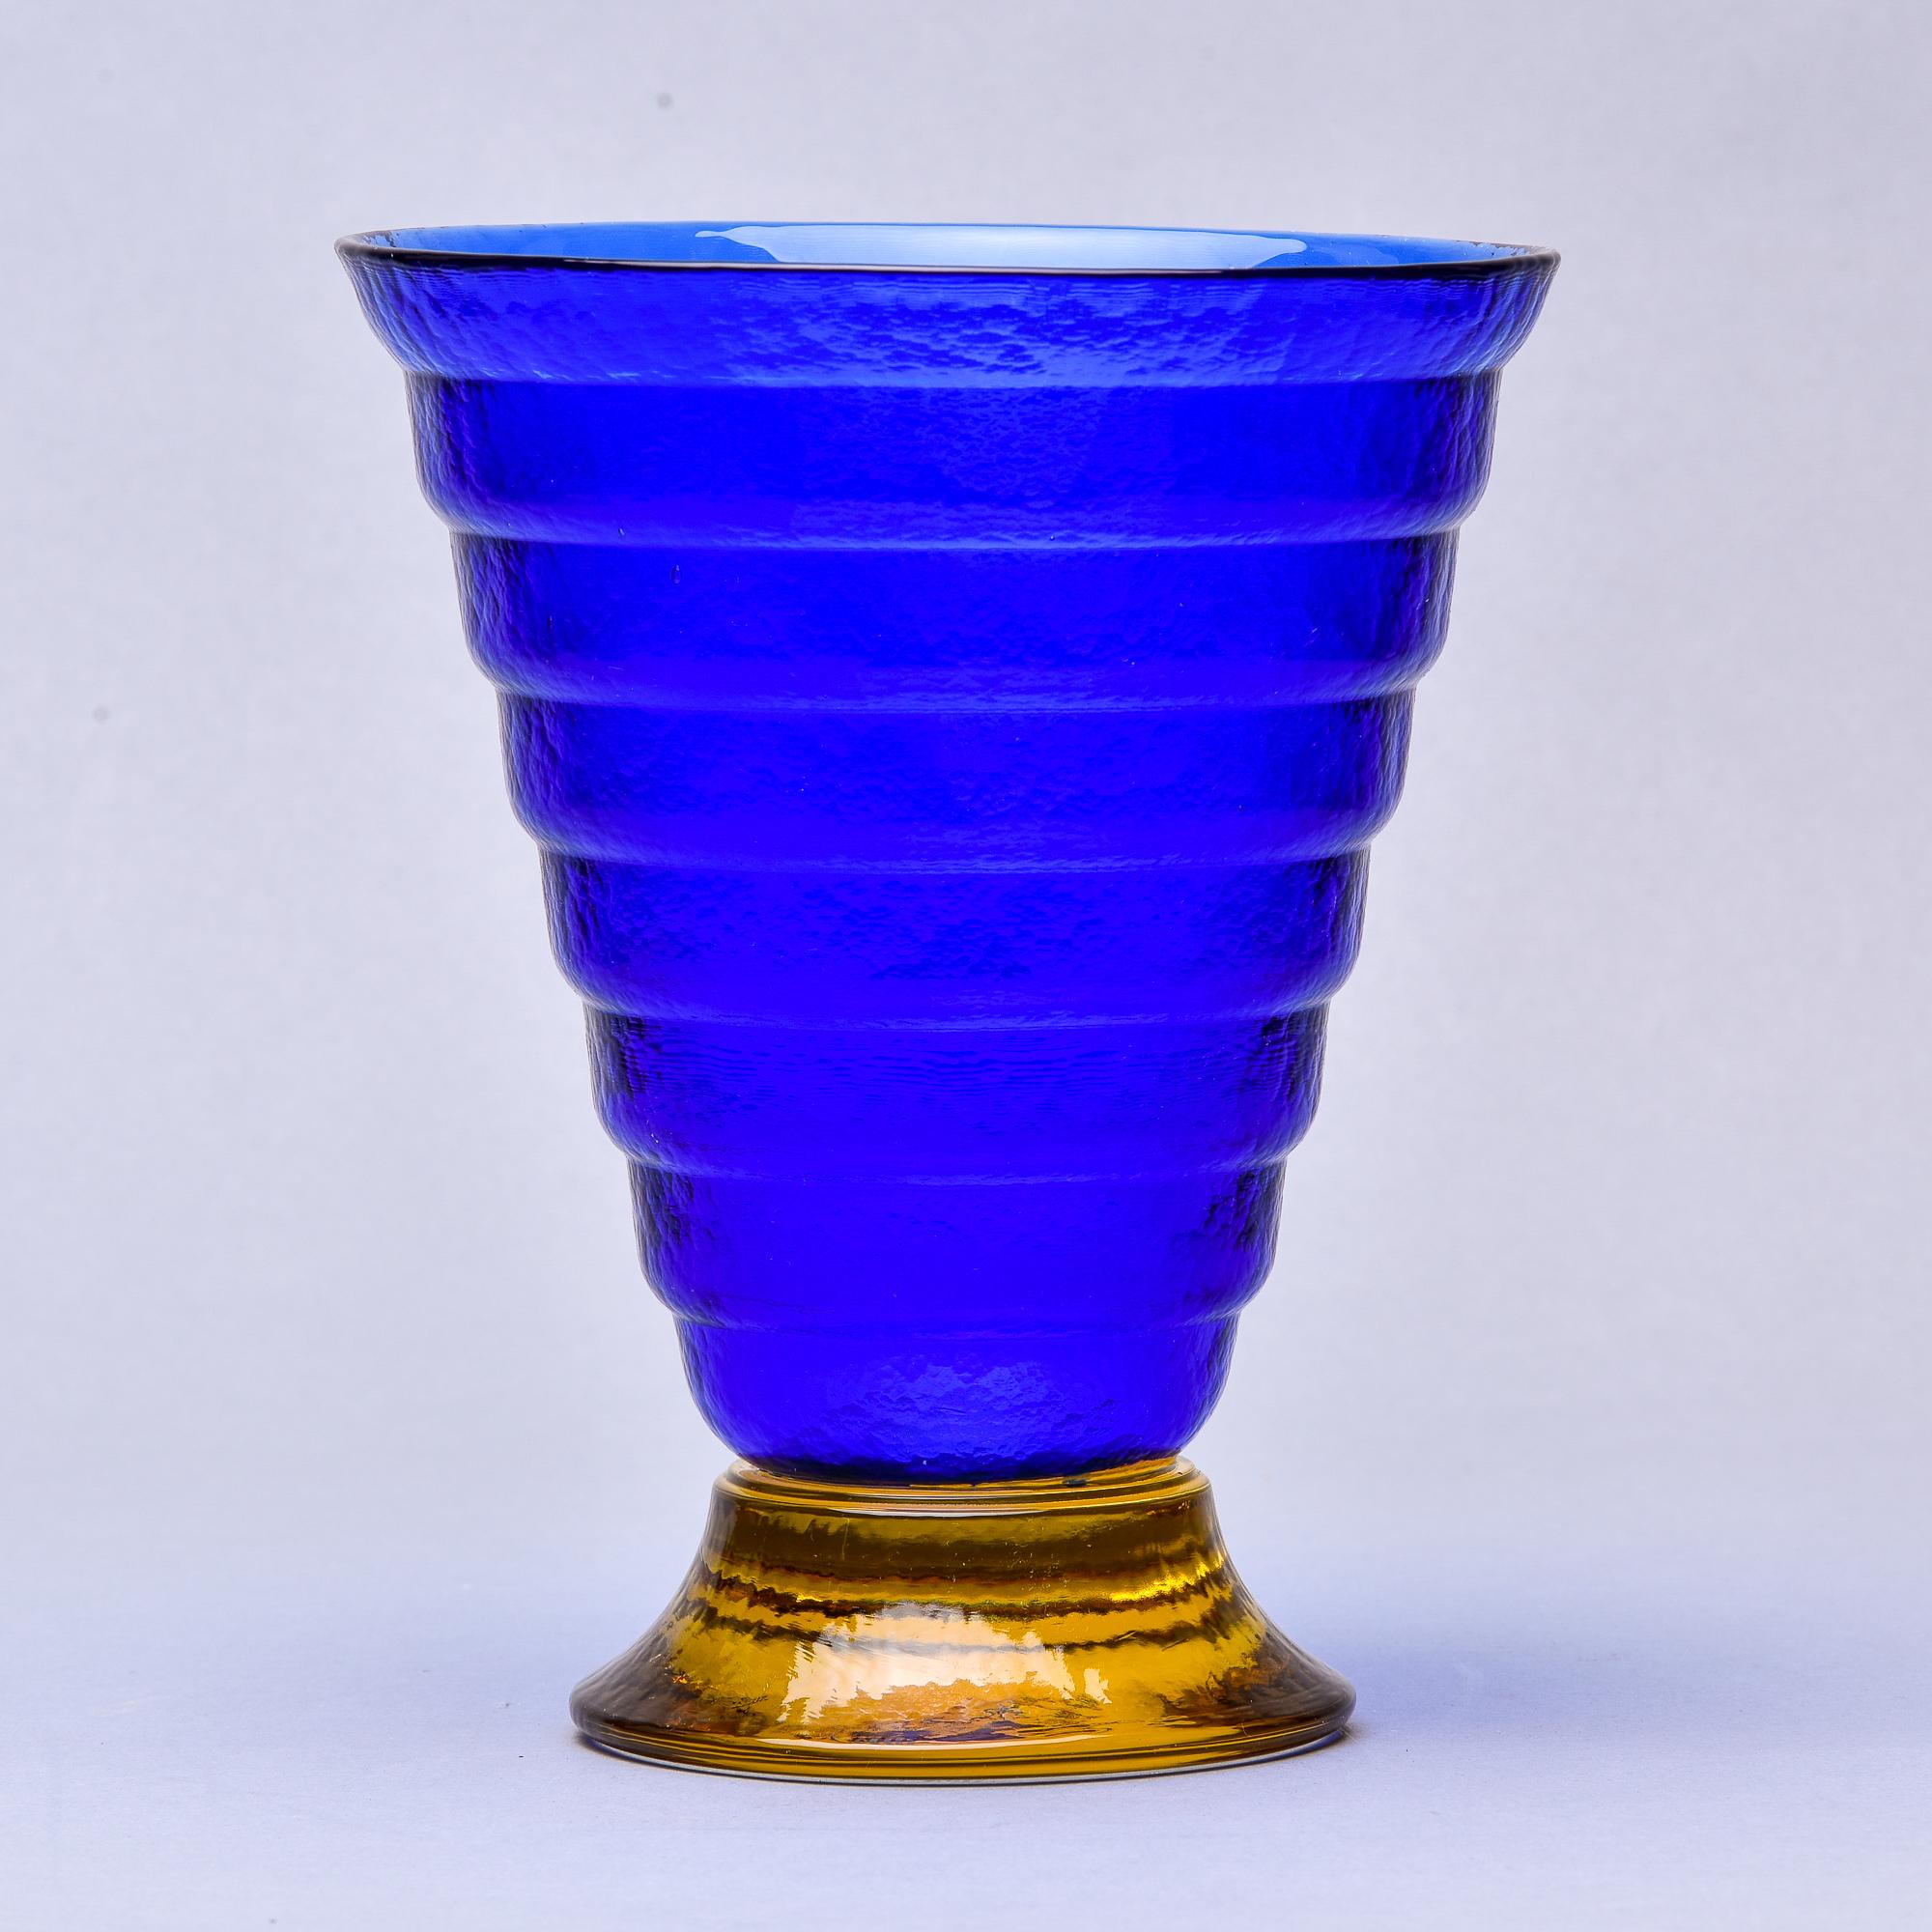 Deep blue Murano glass vase with gold base.

Found in Italy, this circa 1960s Murano glass vase features a saturated heavy blue flared and ridged body on a pedestal base in a contrasting gold. Acid etched maker’s mark on underside of base reads: